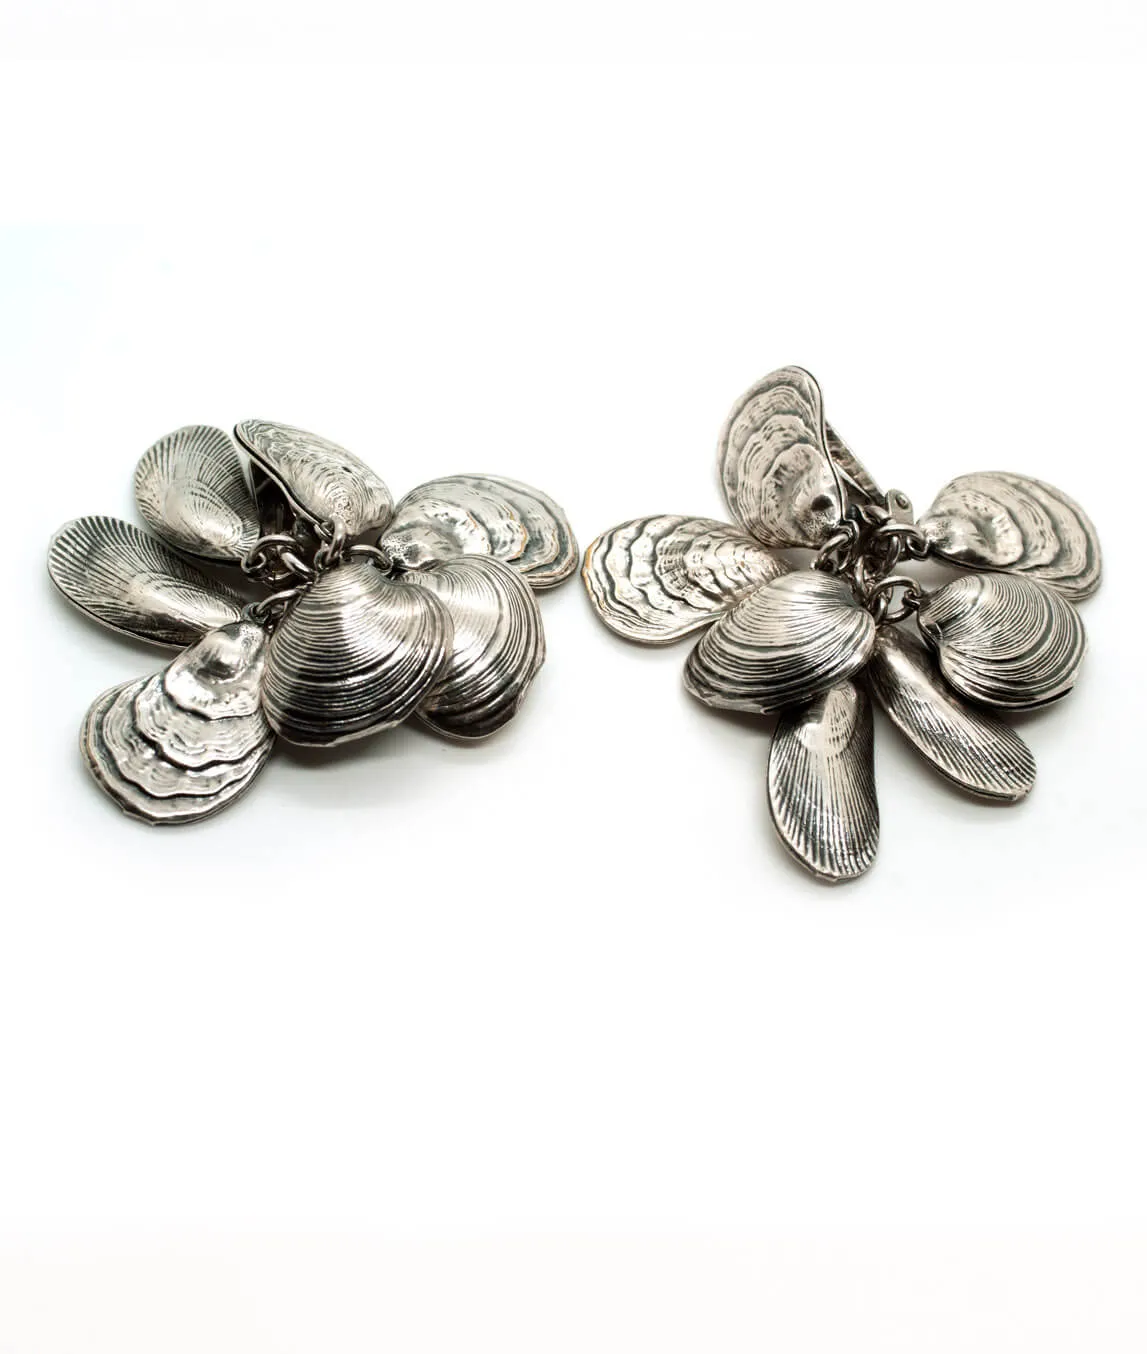 Vintage Napier silver plated clam shell earrings